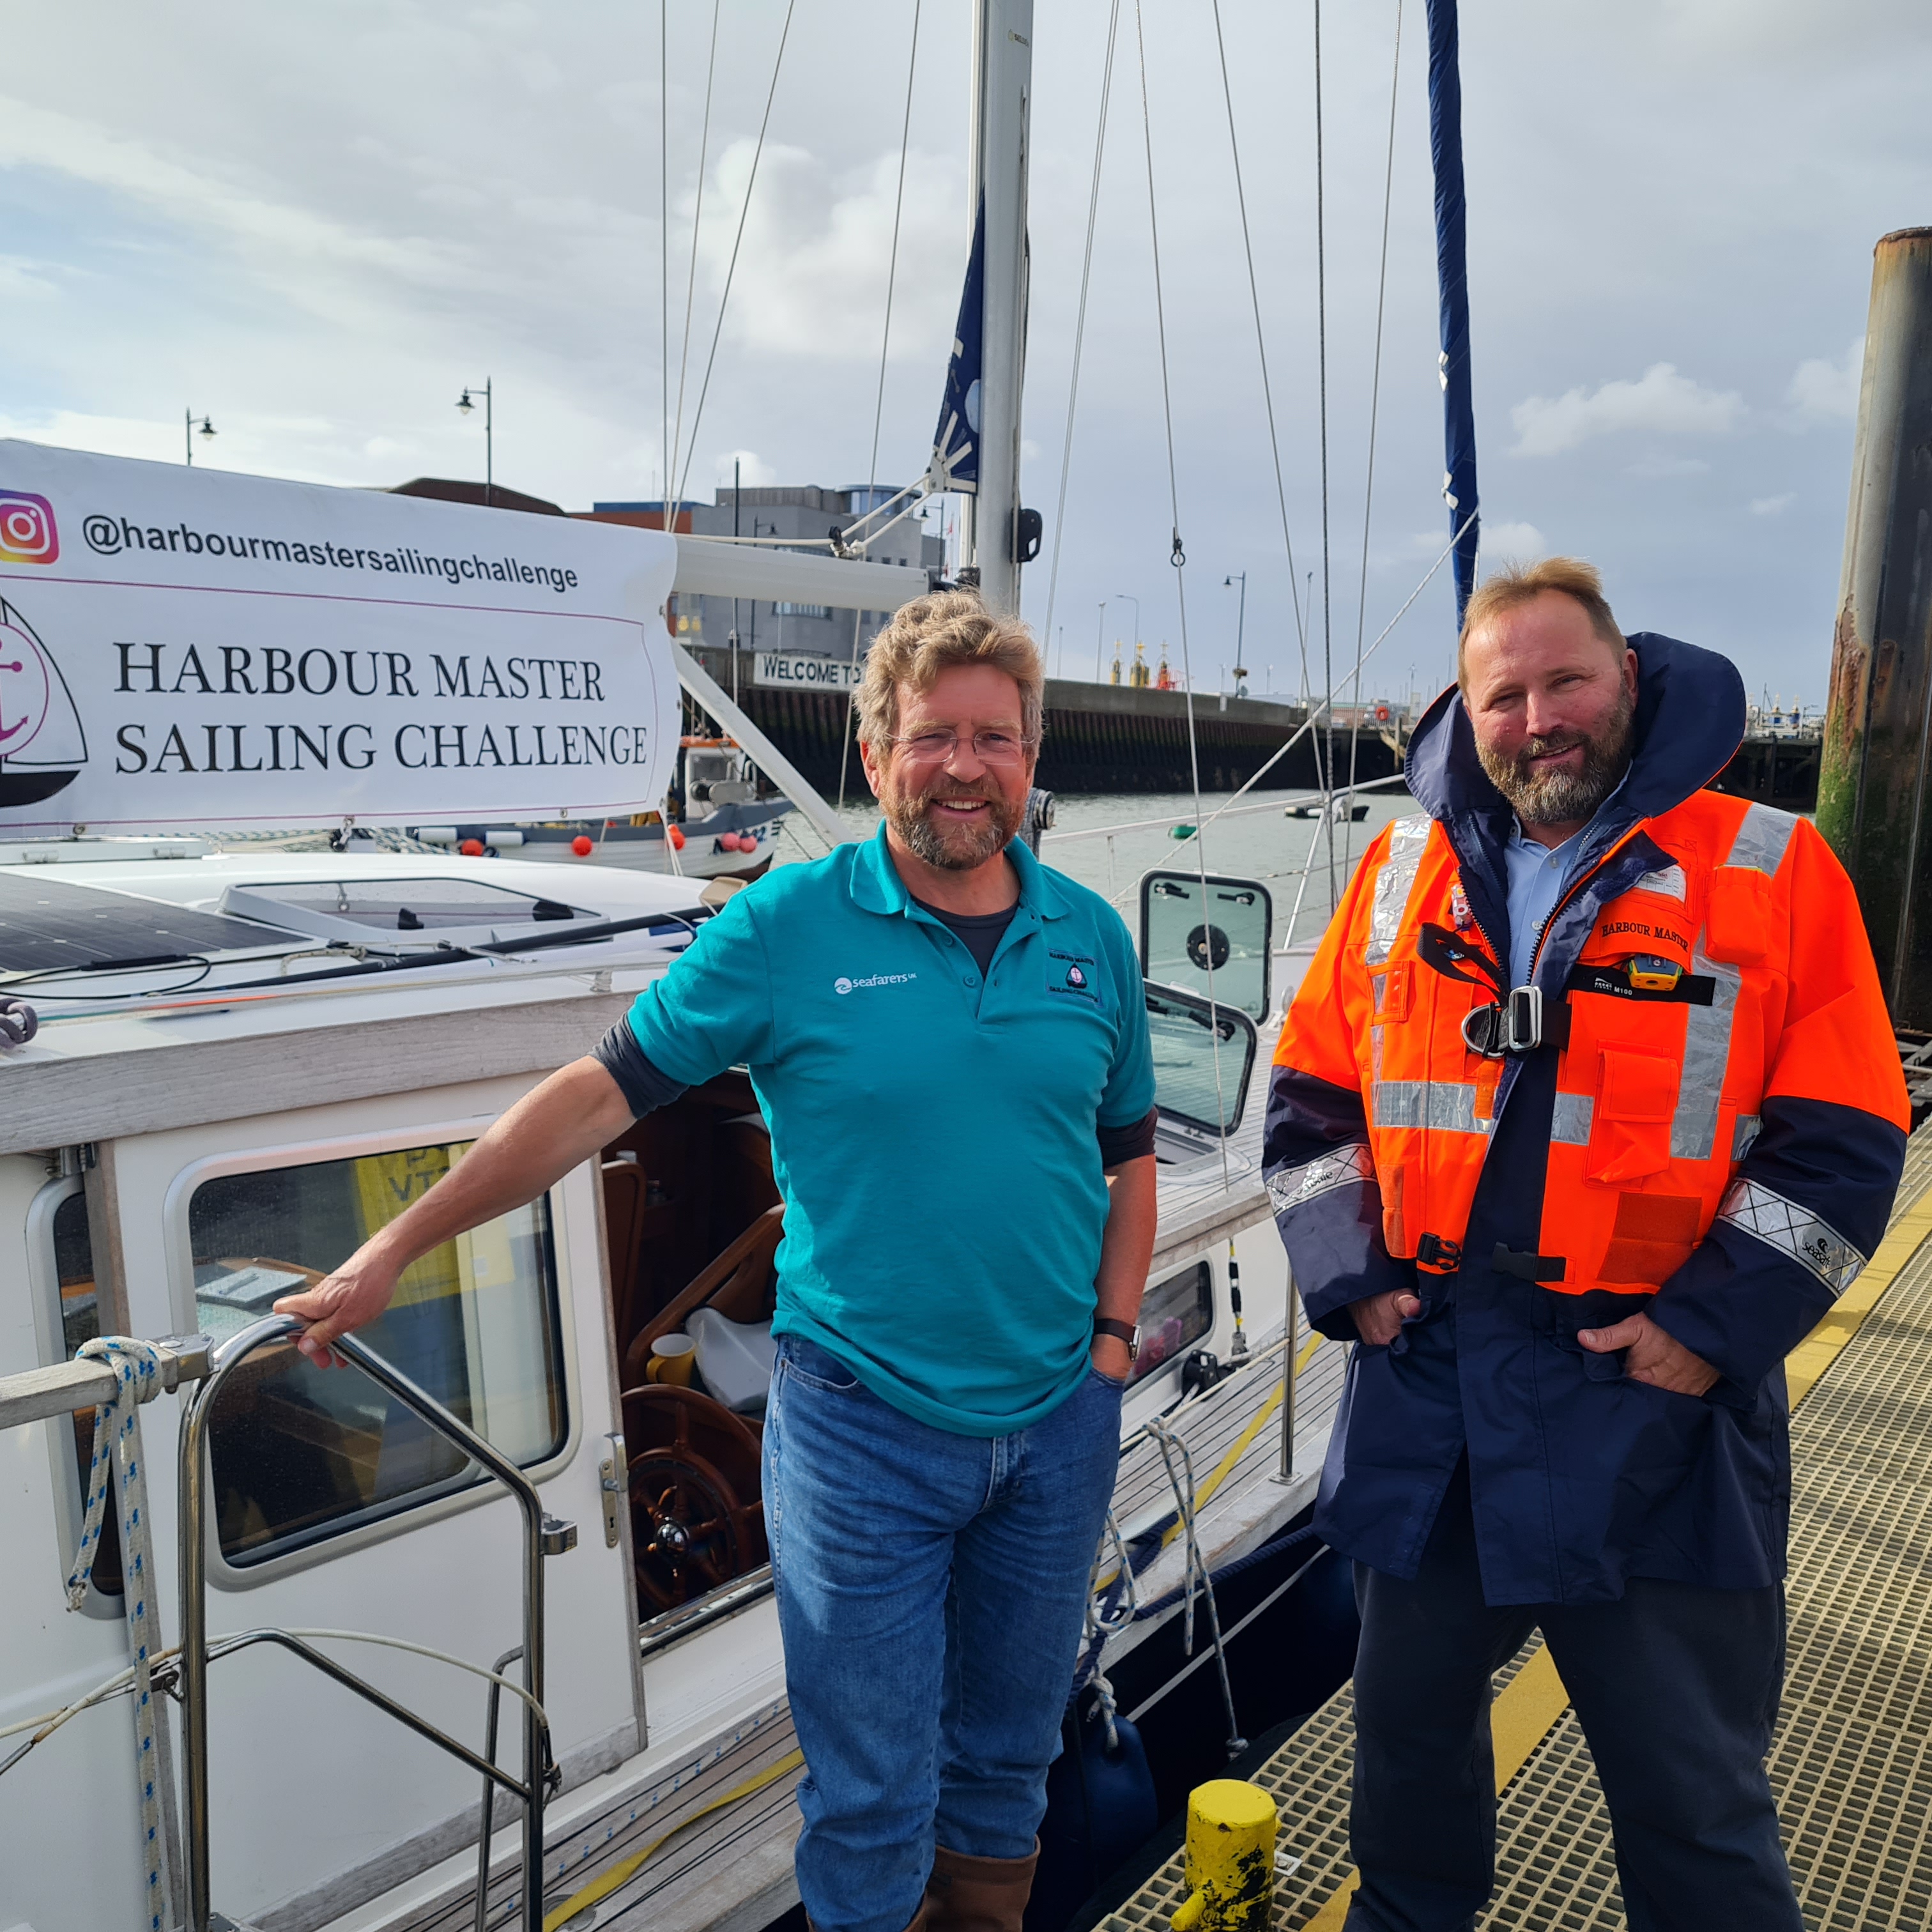 Harbour Master Sailing Challenge: Mark Ashley Miller in Harwich (with Harbourmaster Mike Dunn)